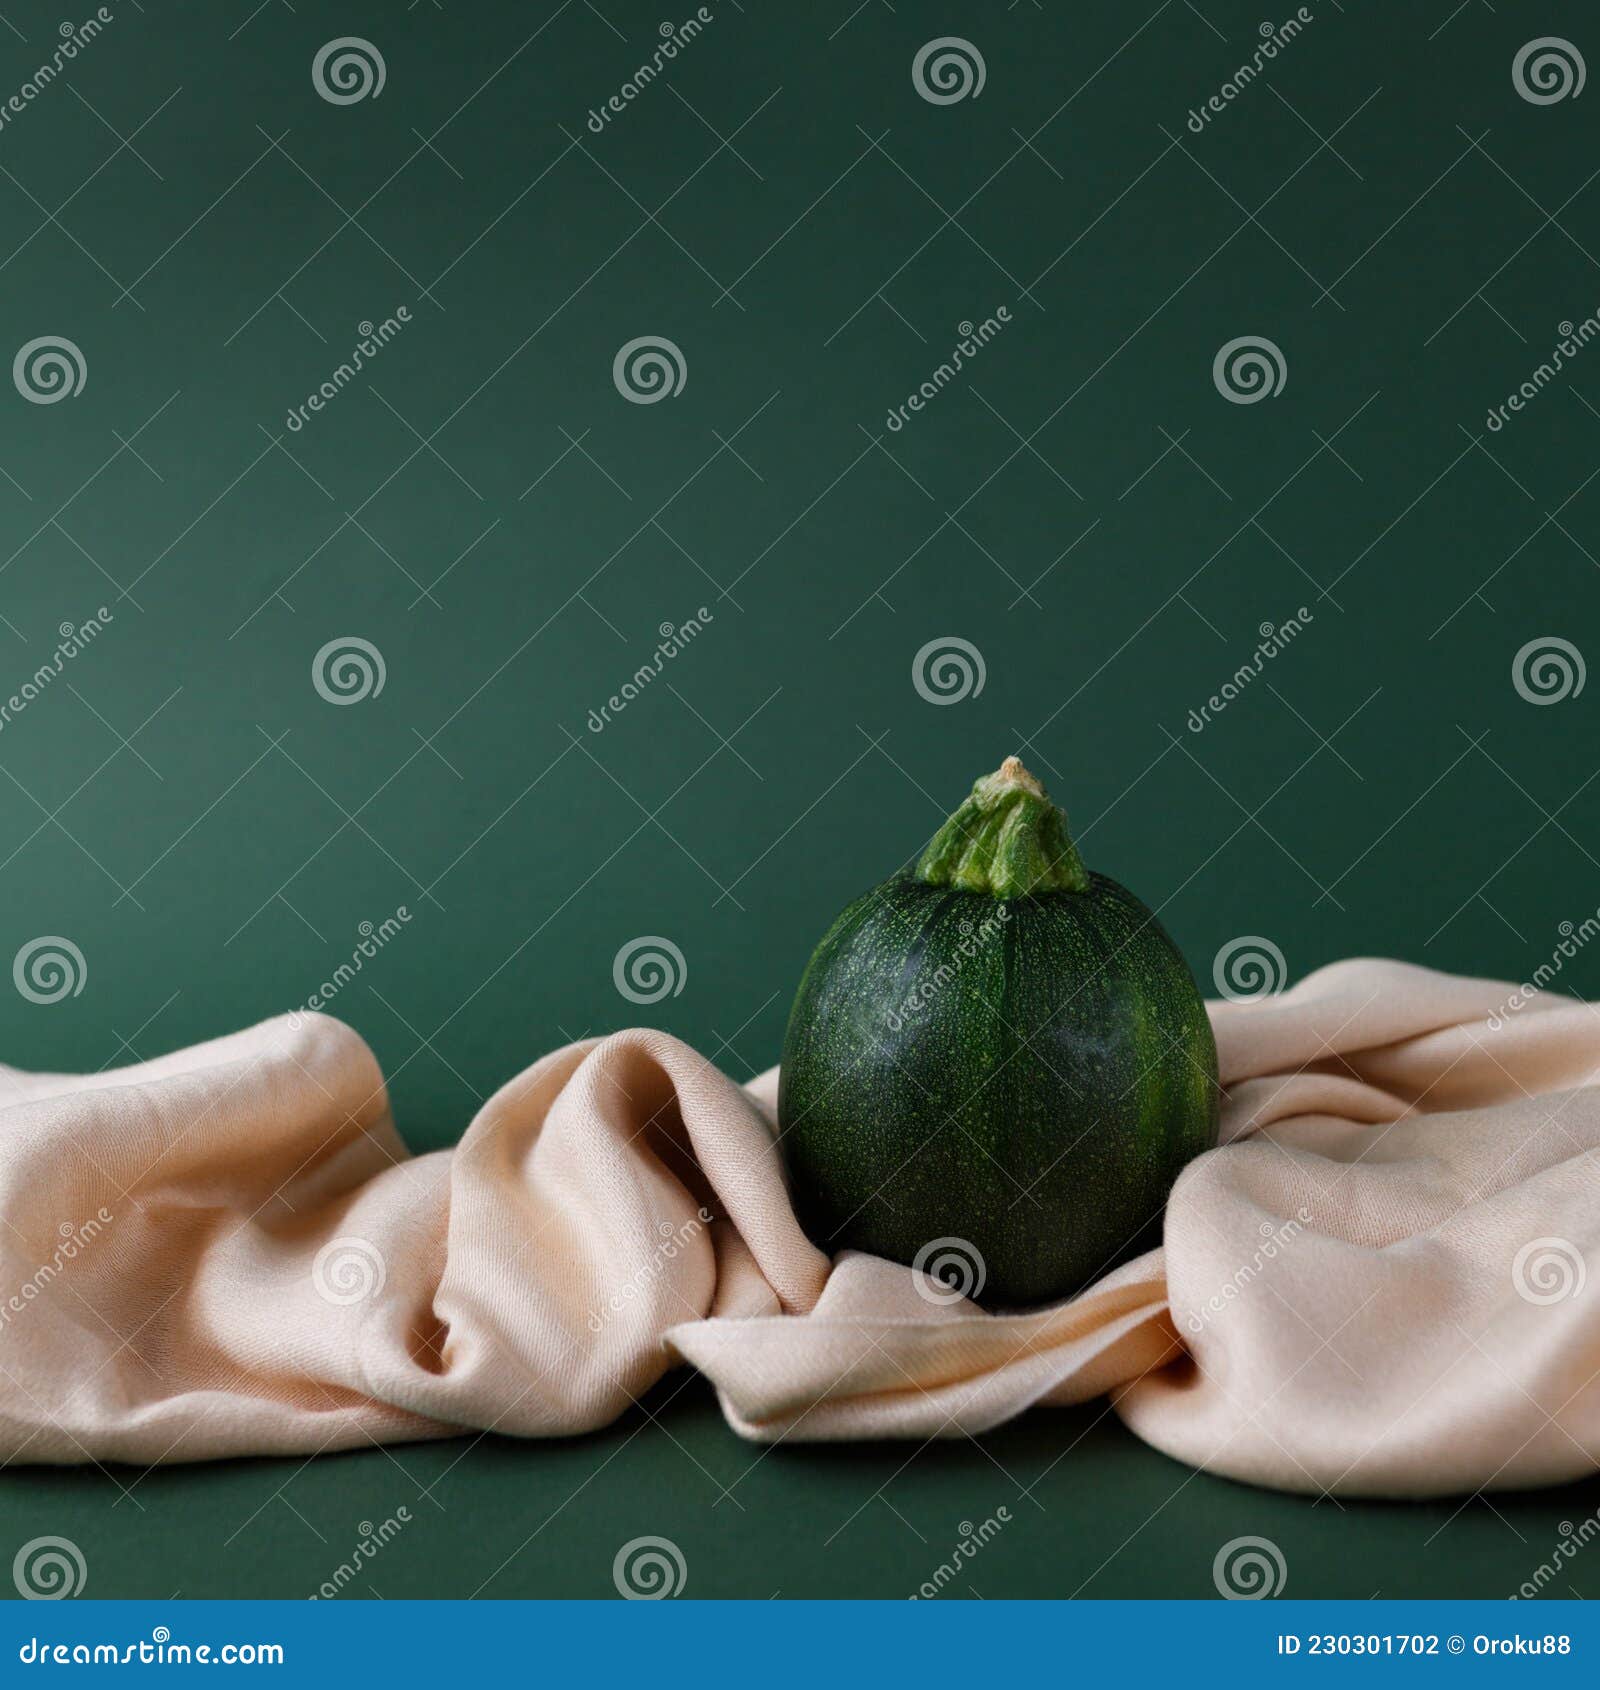 autumn concept of zucchini  on a green background with saten fabric cloth